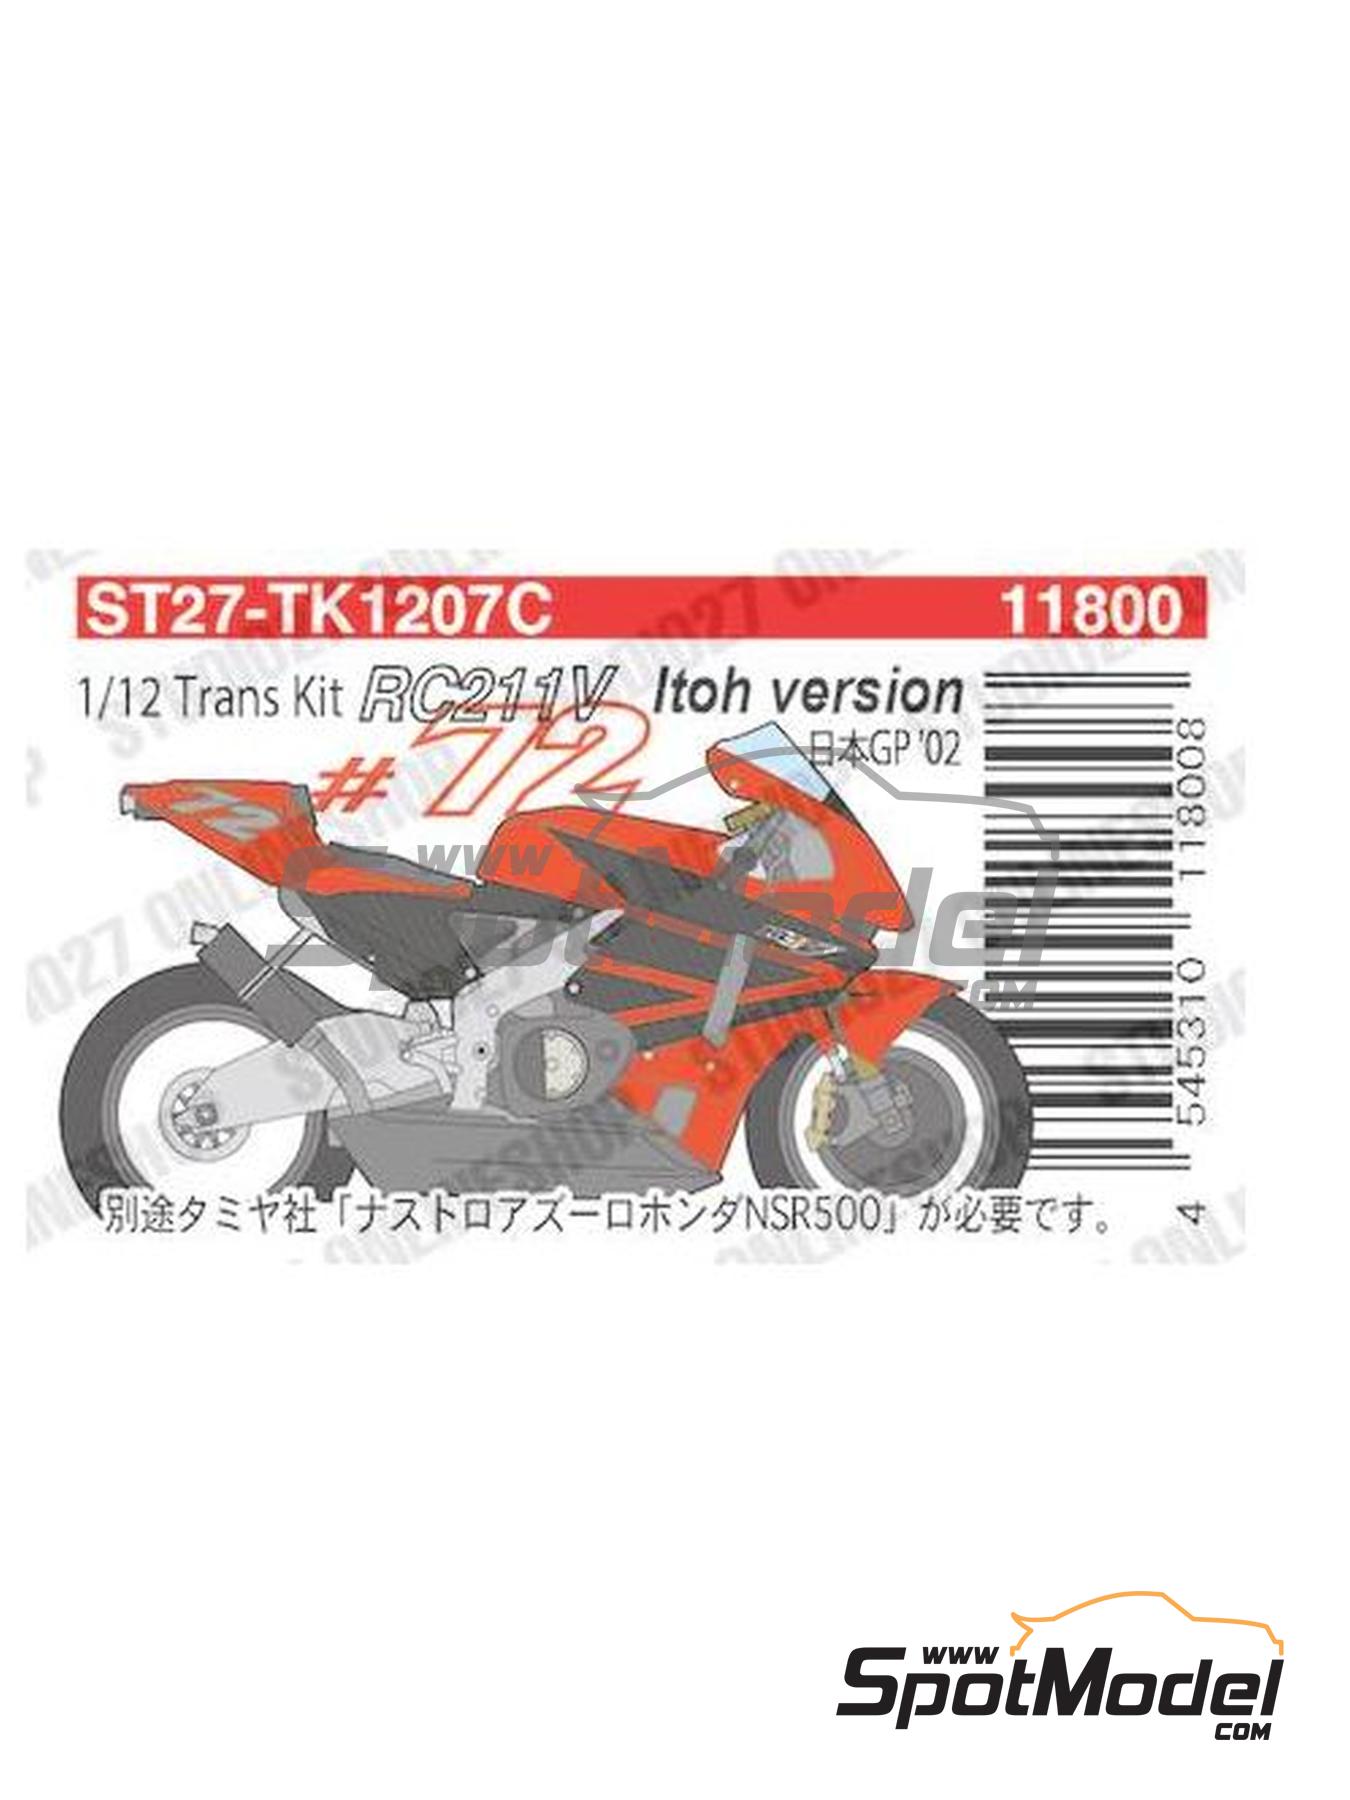 Honda RC211V HRC Team - Japanese Moto GP Grand Prix 2002. Transkit in 1/12  scale manufactured by Studio27 (ref. ST27-TK1207C, also 4545310118008 and T